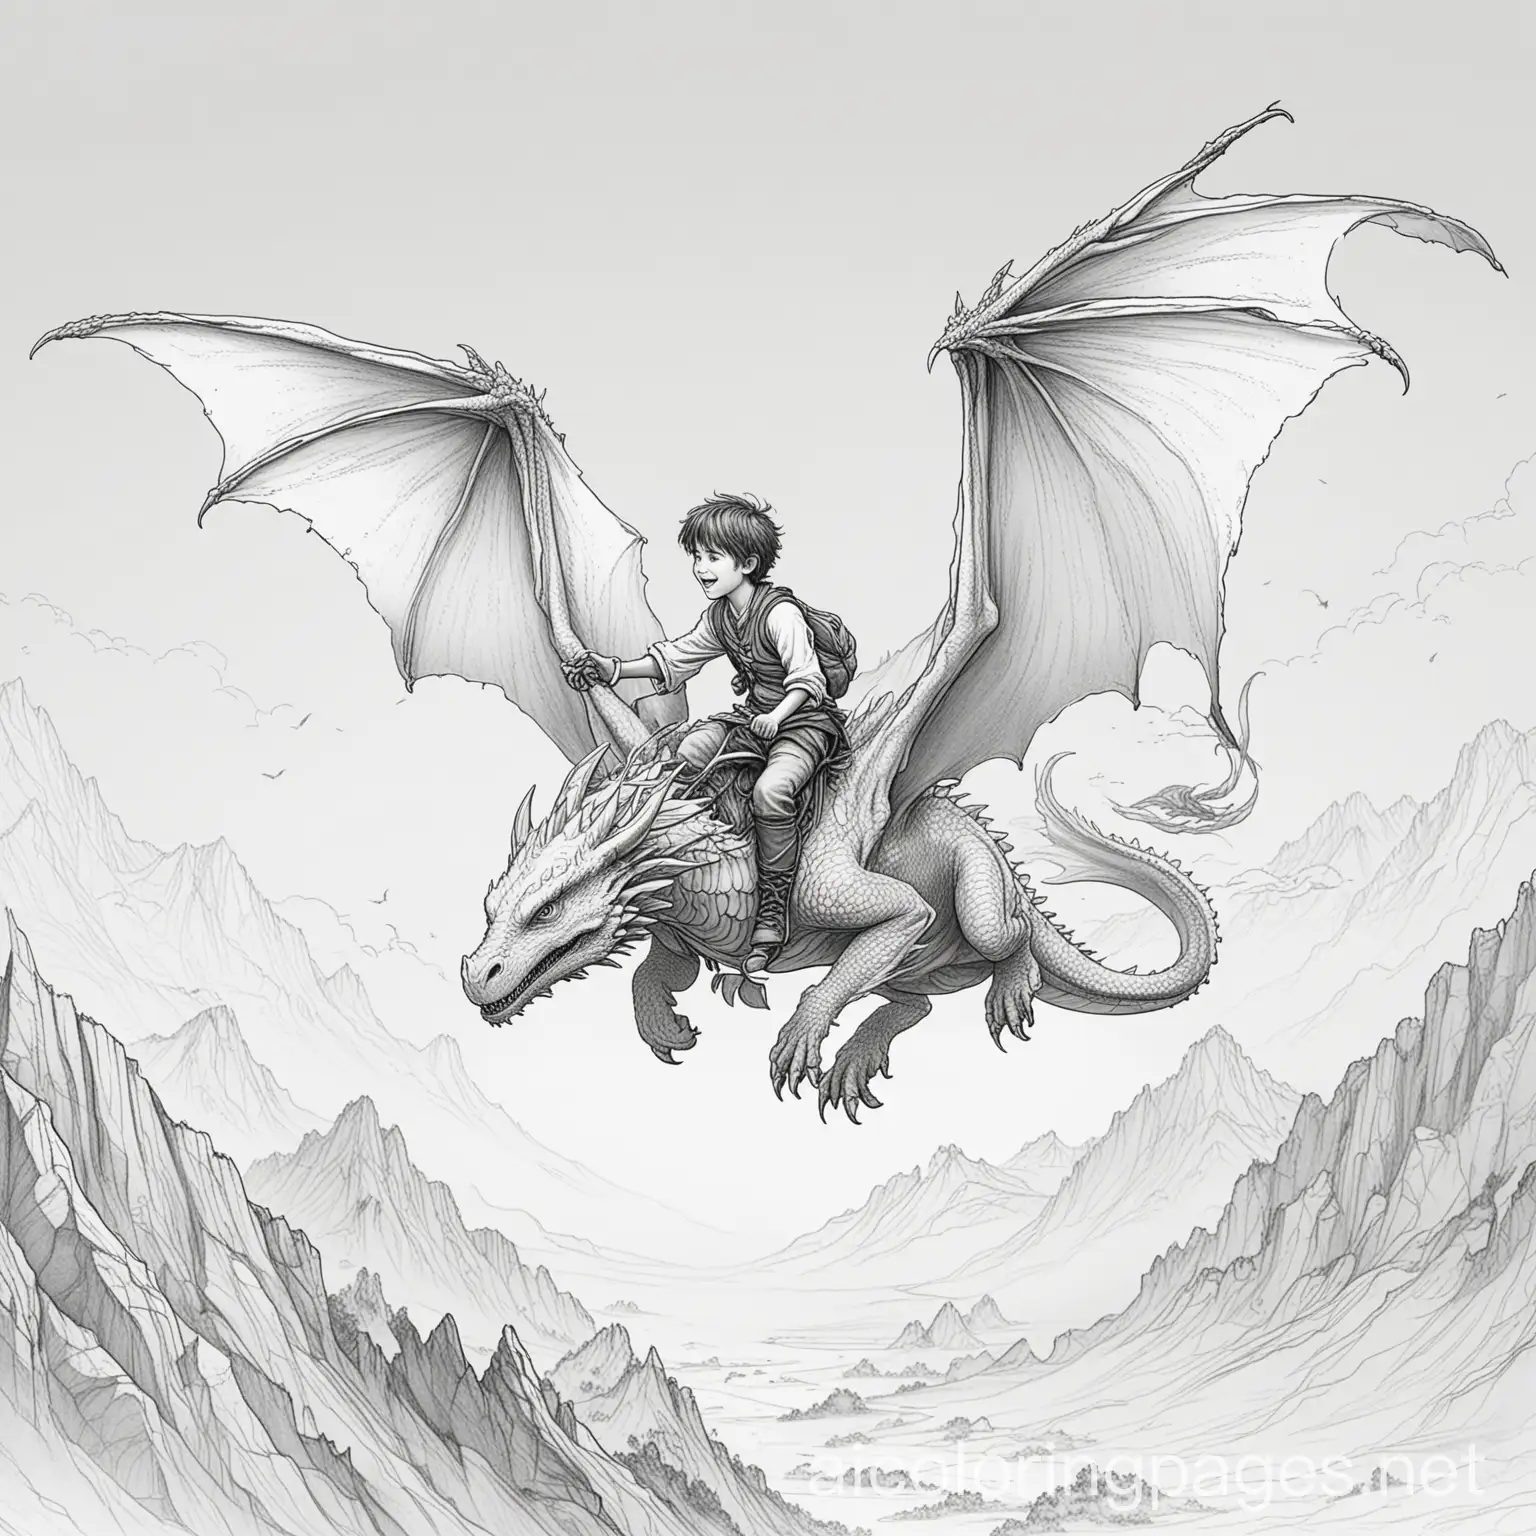 boy flying away on a dragons back, Coloring Page, black and white, line art, white background, Simplicity, Ample White Space. The background of the coloring page is plain white to make it easy for young children to color within the lines. The outlines of all the subjects are easy to distinguish, making it simple for kids to color without too much difficulty